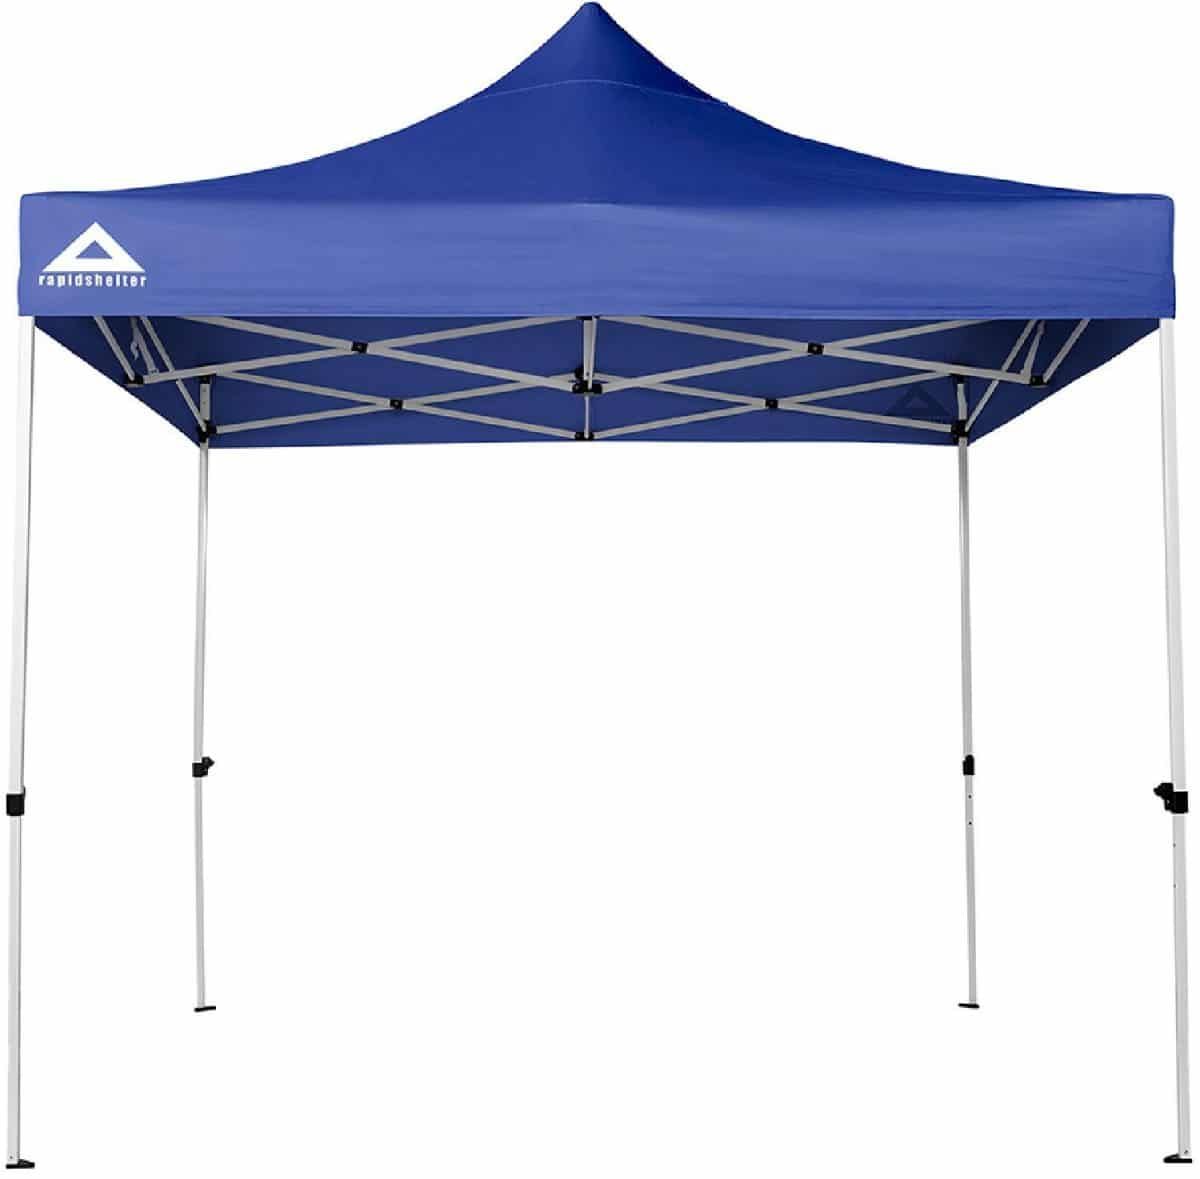 Product Image for the Caddis Rapid Shelter Canopy in blue.